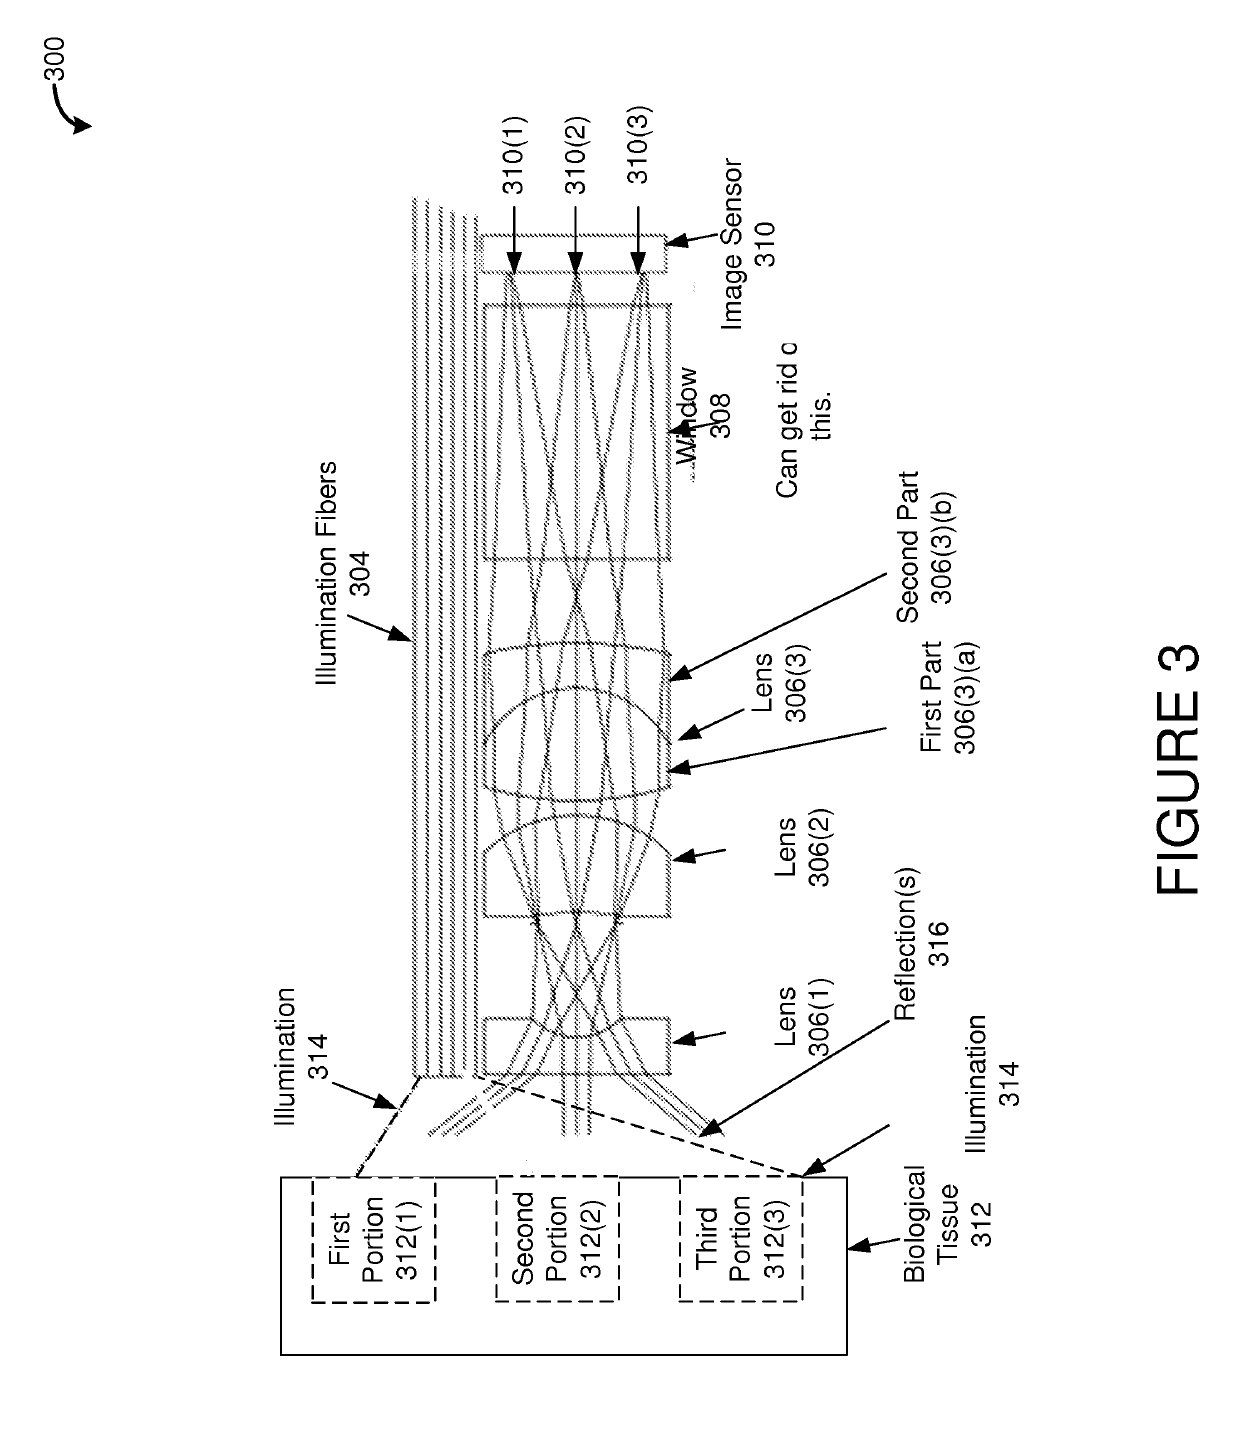 Systems and methods for medical imaging